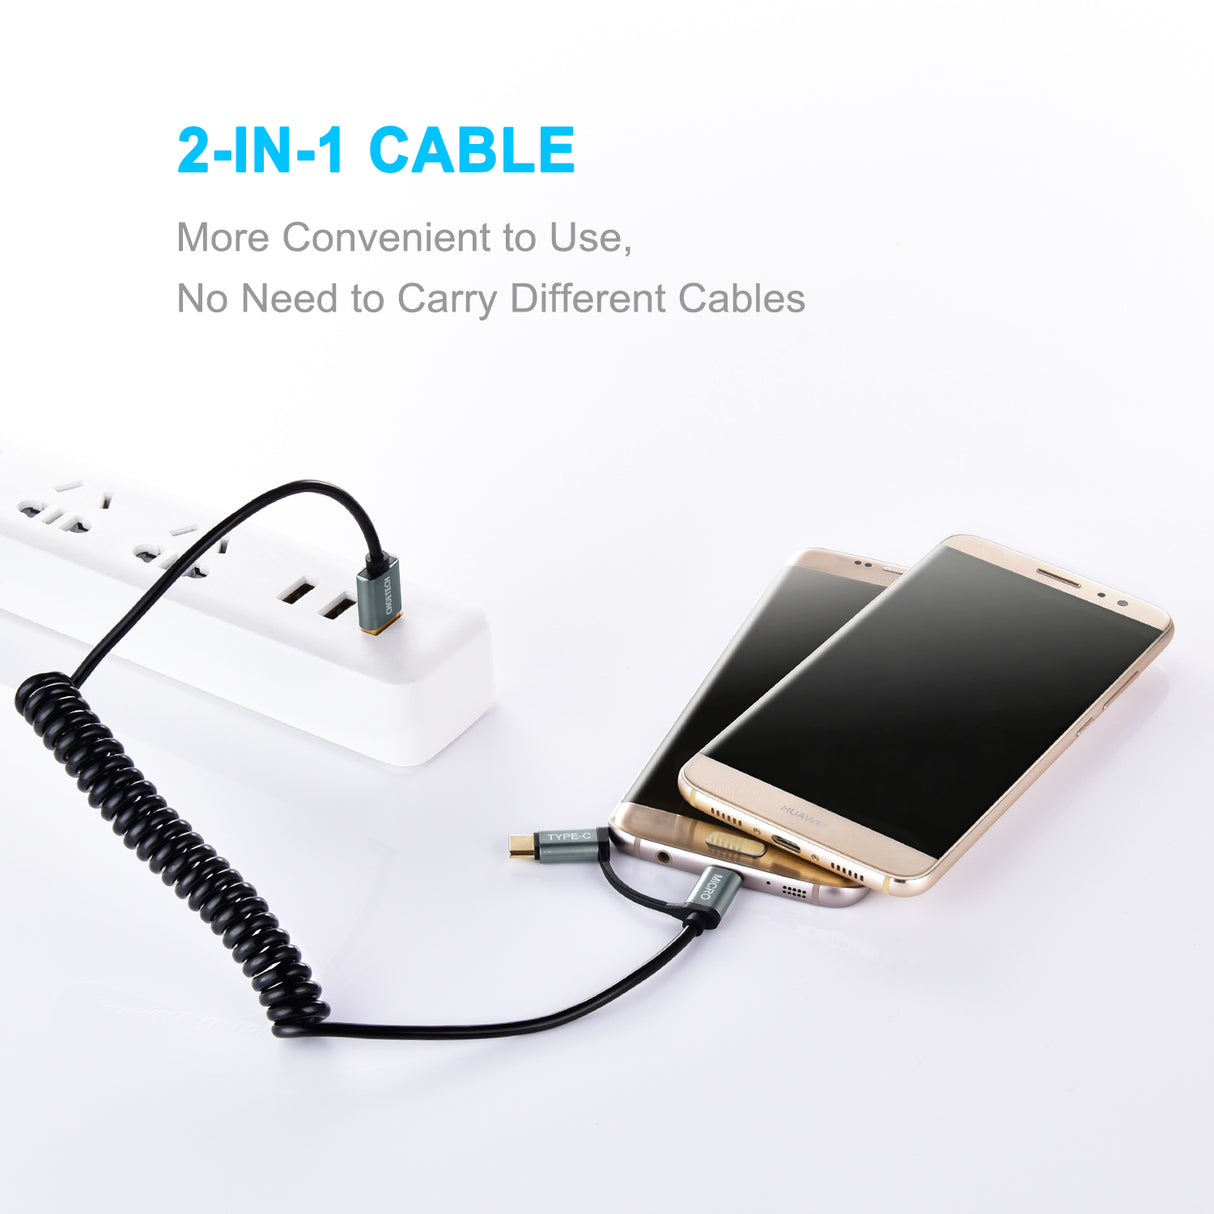 XAC-0012-101/102 CHOETECH 2 in 1 USB Type C+Micro USB Cable (Coiled) 4ft/1.2m Charge & Sync Cable for Galaxy S9/ S9 Plus, Note 8, S8/ S8 Plus, LG G6/ G5 and Other Type C & Micro USB Devices